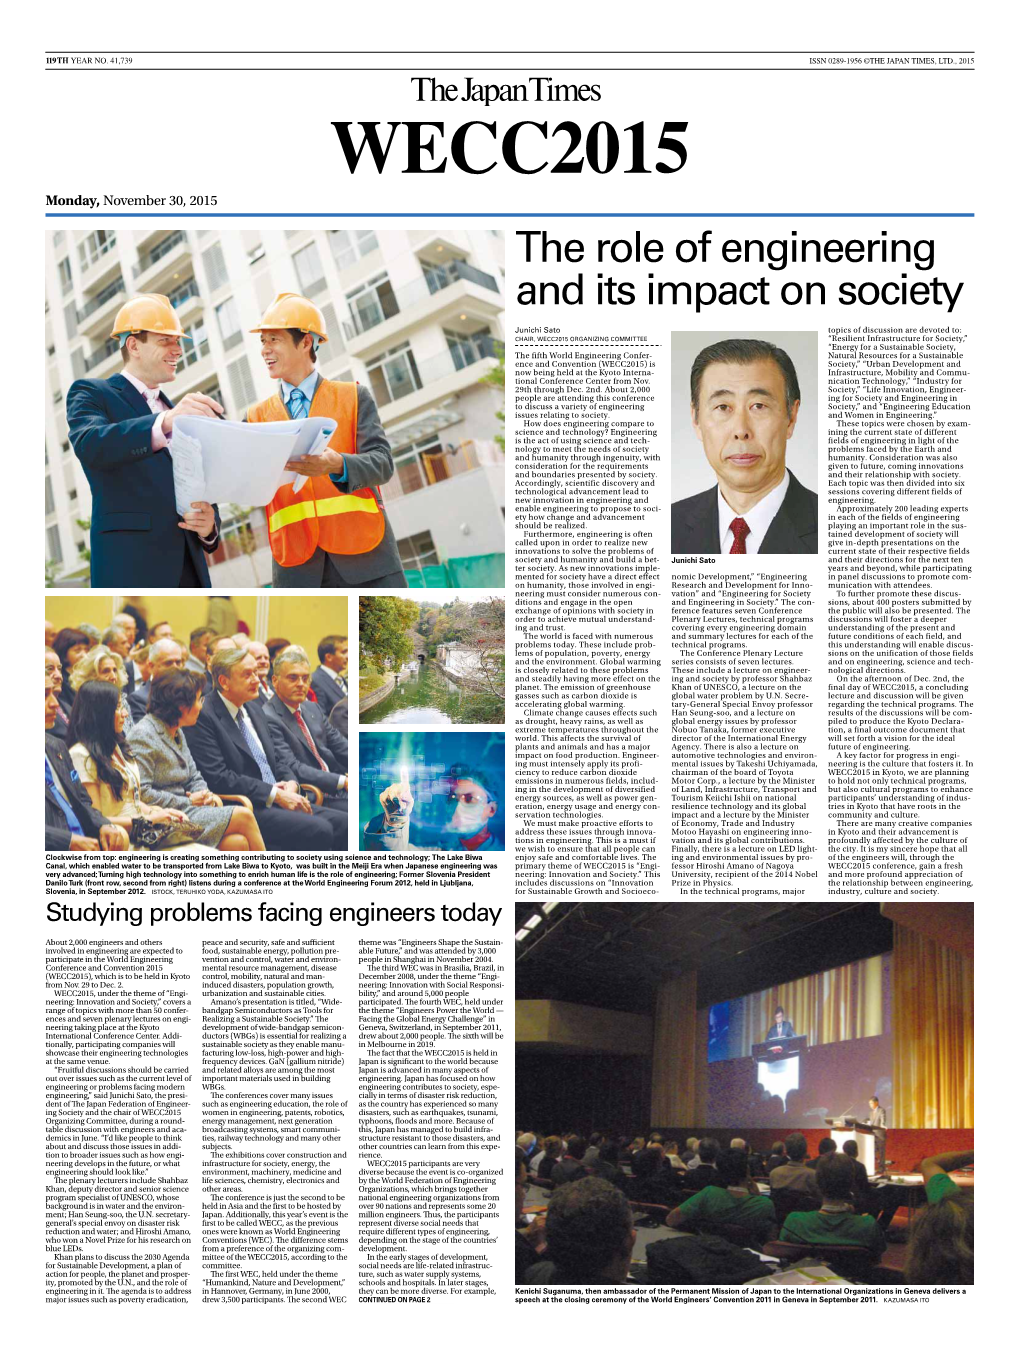 THE JAPAN TIMES, LTD., 2015 WECC2015 Monday, November 30, 2015 the Role of Engineering and Its Impact on Society